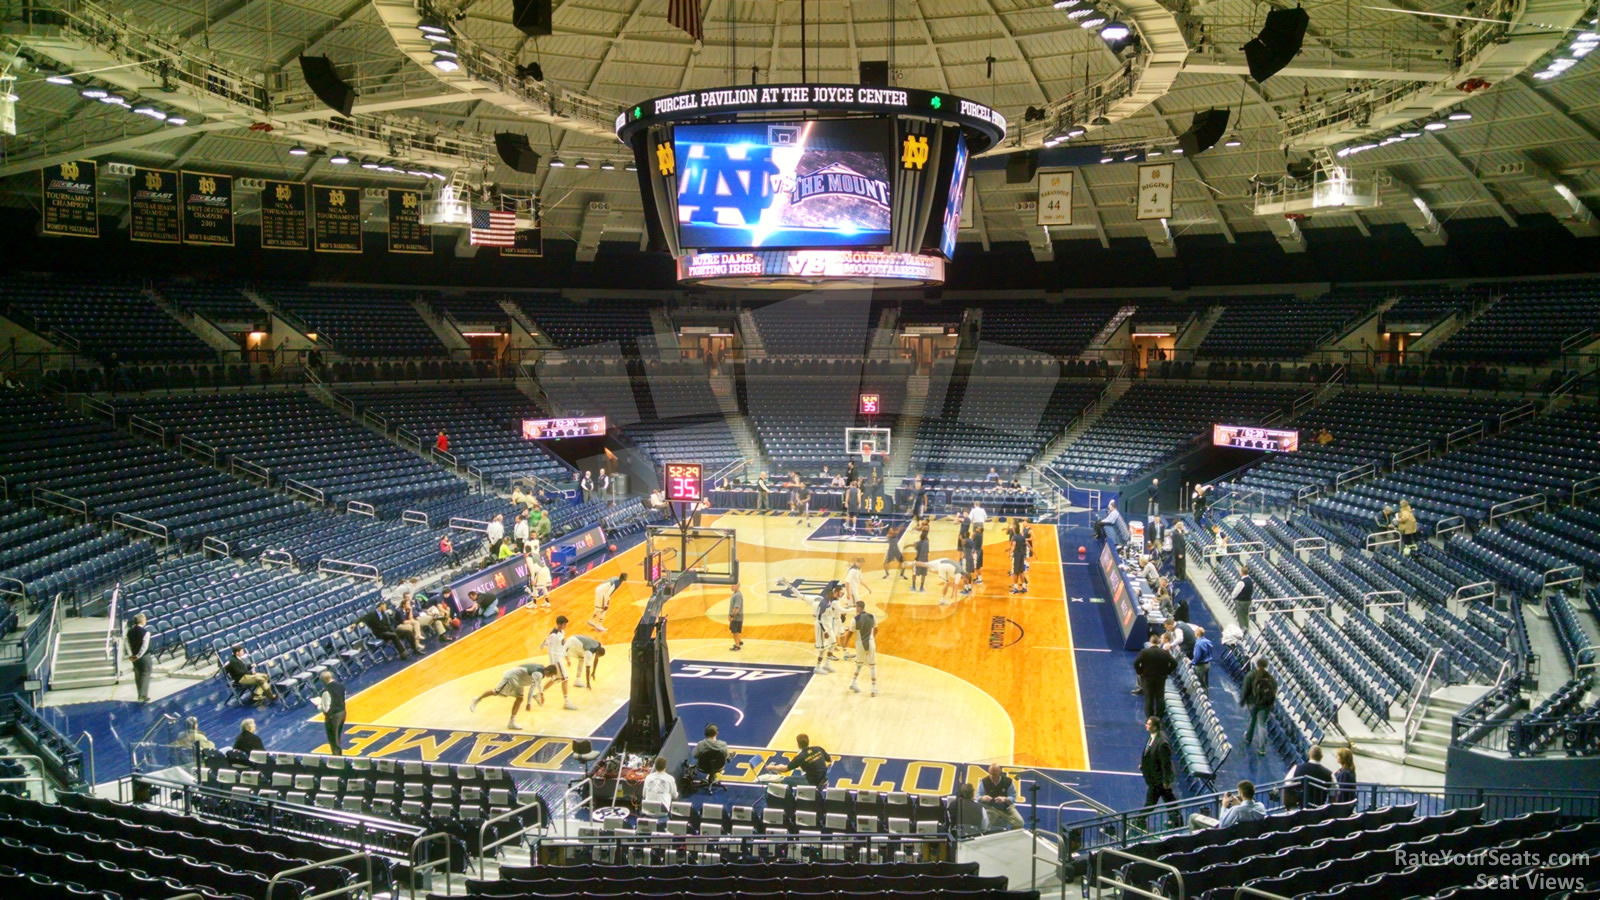 section 105, row 3 seat view  - joyce center